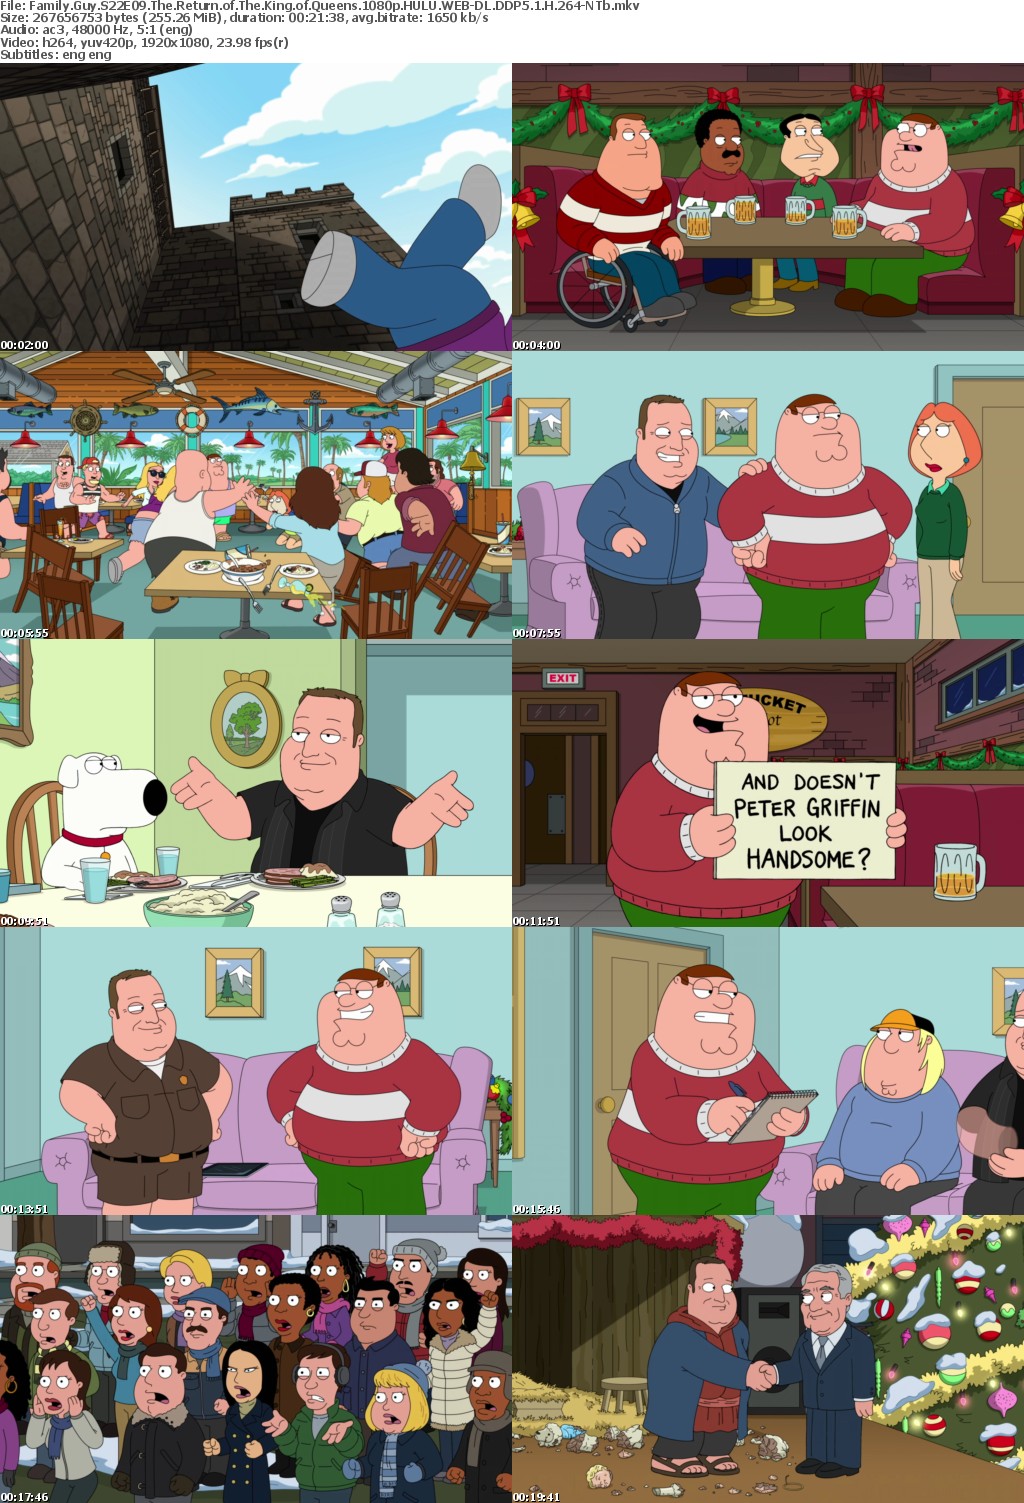 Family Guy S22E09 The Return of The King of Queens 1080p HULU WEB-DL DDP5 1 H 264-NTb